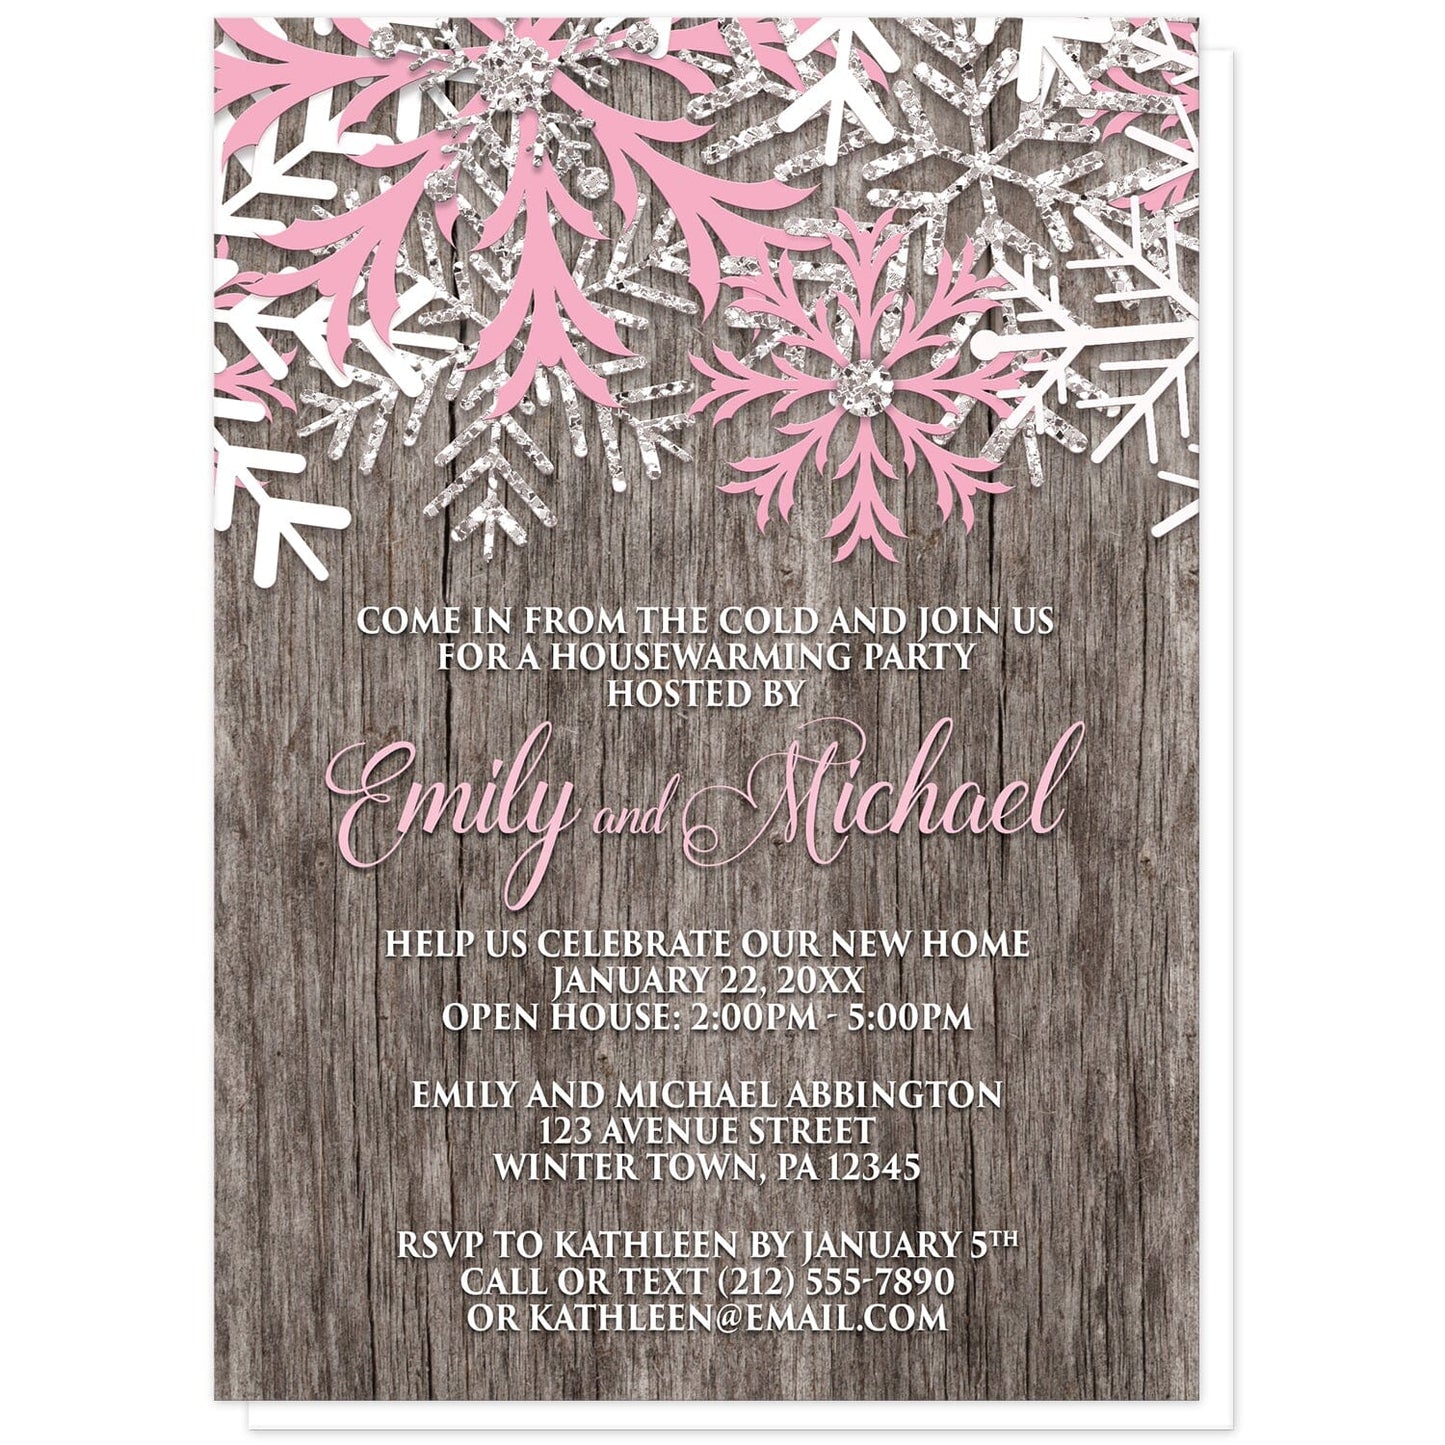 Rustic Winter Wood Pink Snowflake Housewarming Invitations at Artistically Invited. Country-inspired rustic winter wood pink snowflake housewarming invitations designed with pink, white, and silver-colored glitter-illustrated snowflakes along the top over a rustic wood pattern illustration. Your personalized housewarming celebration details are custom printed in pink and white over the wood background below the snowflakes.